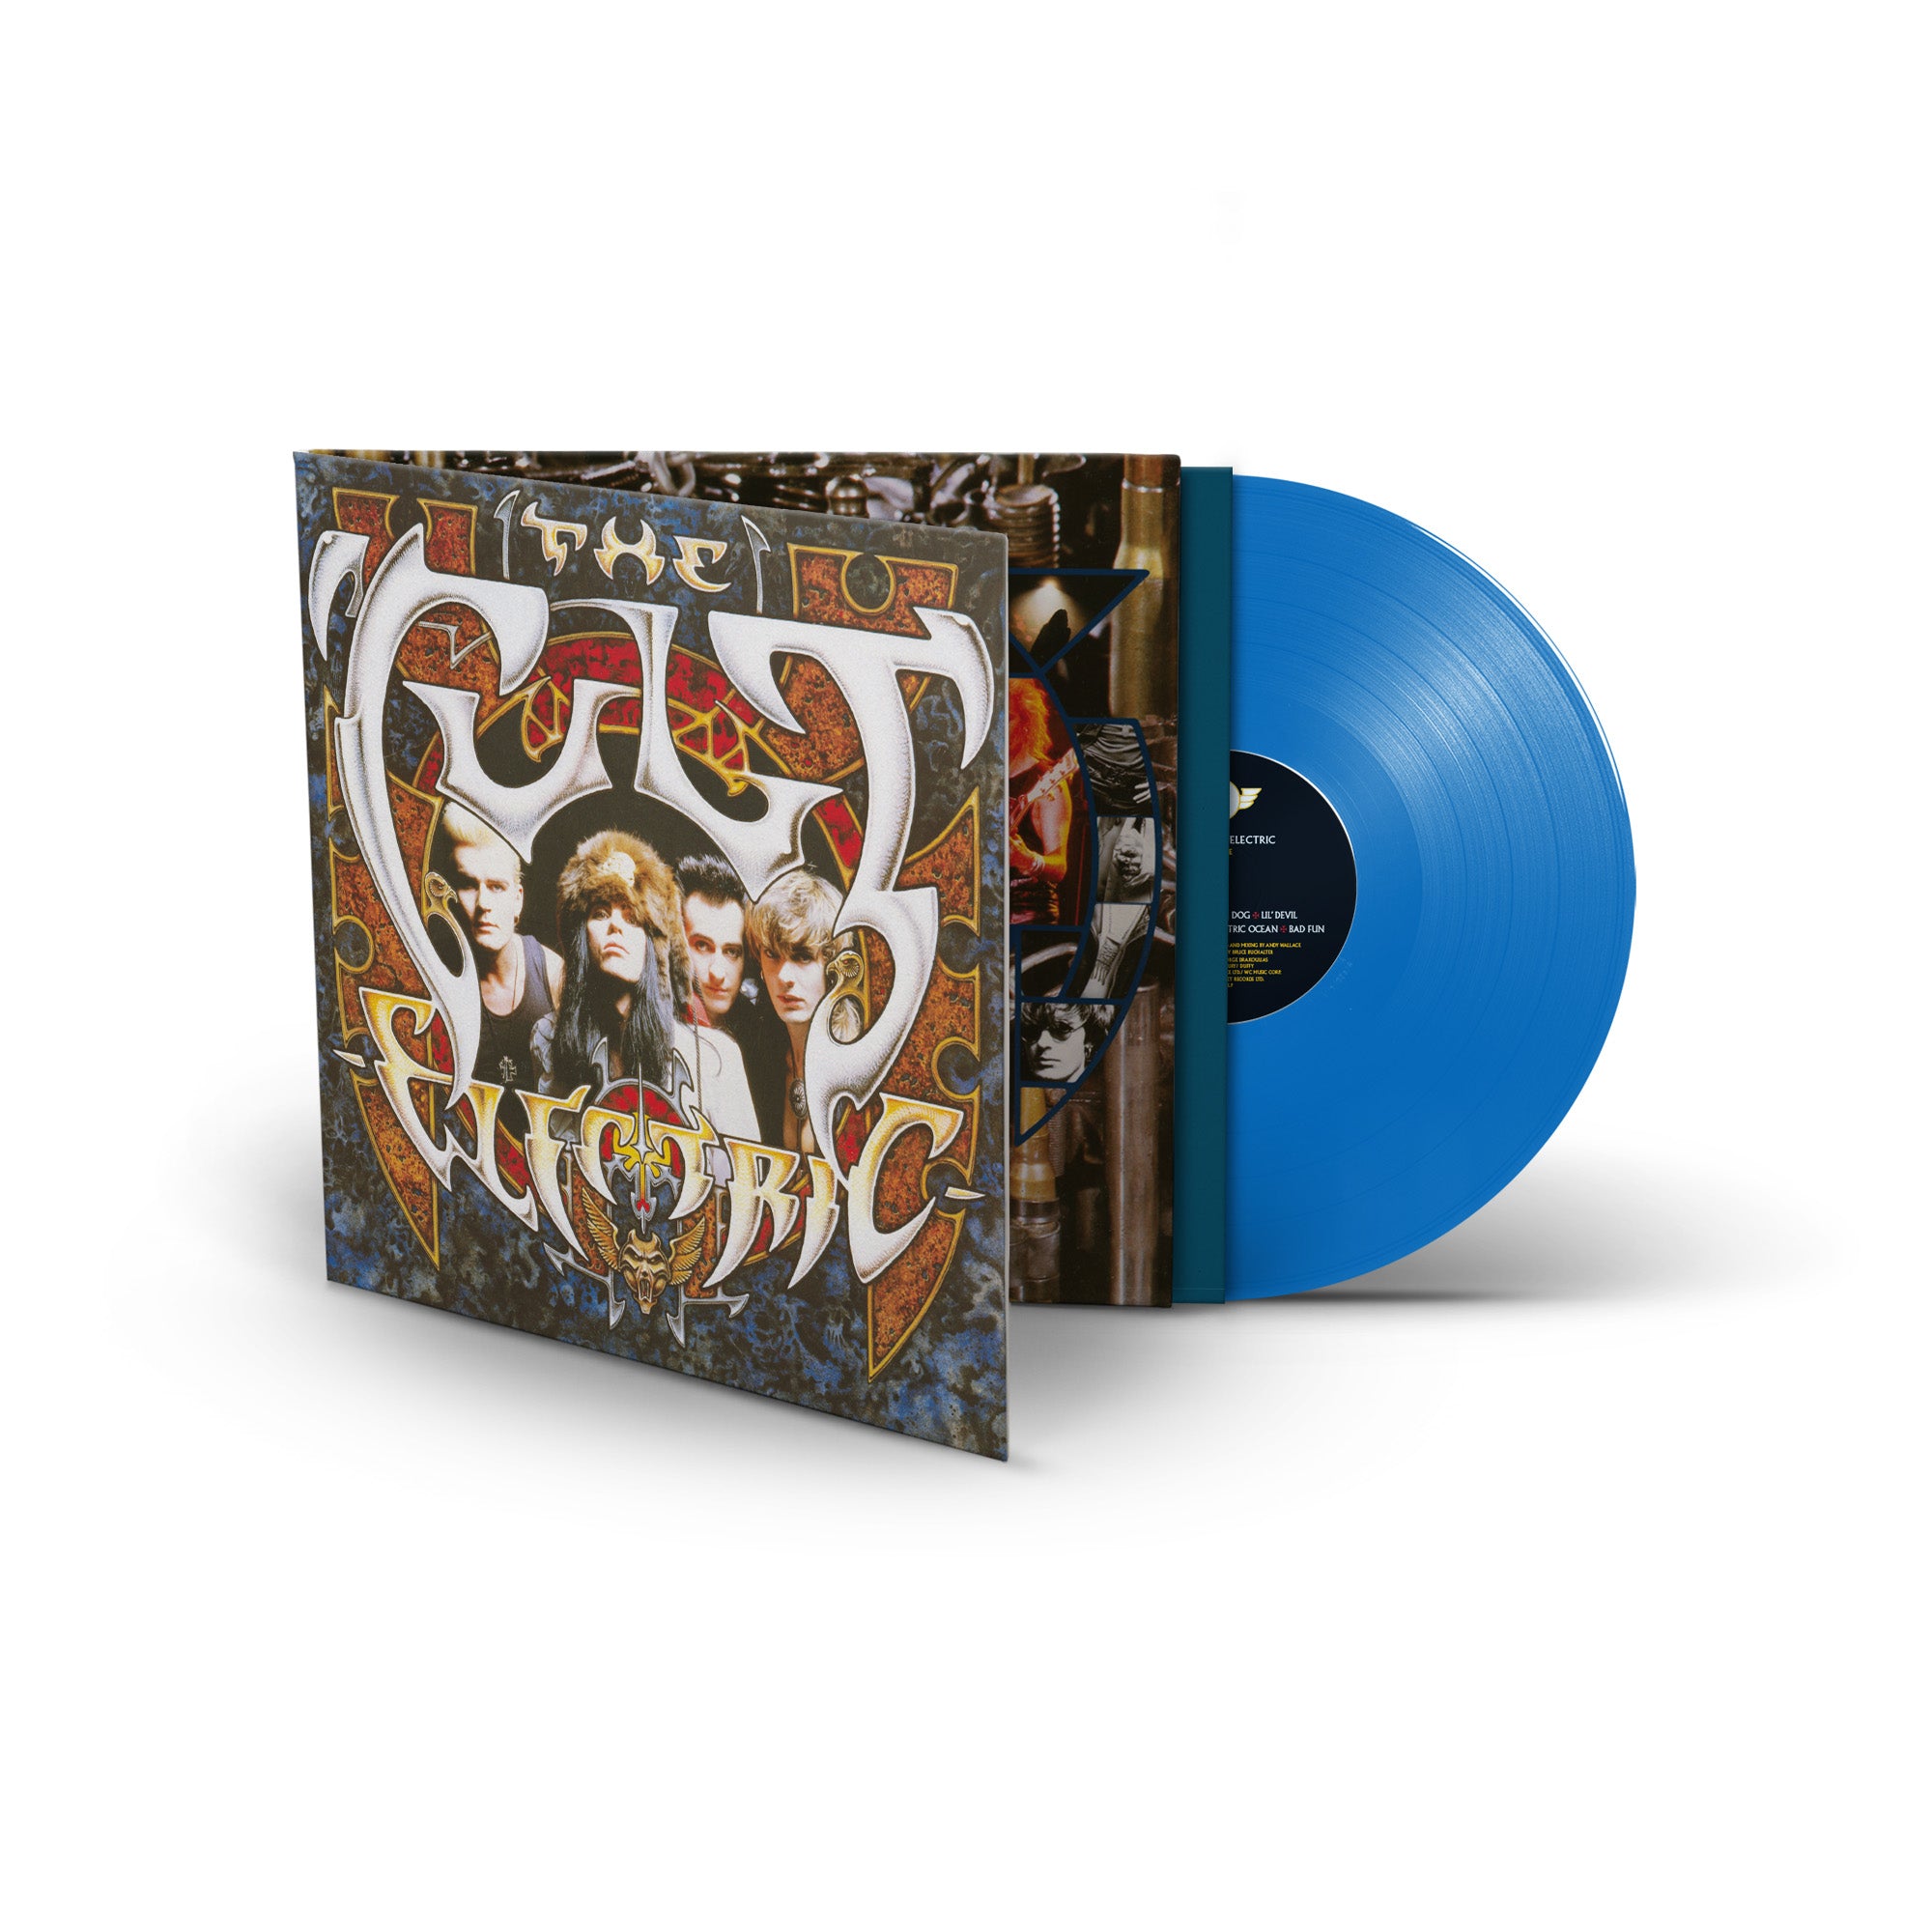 The Cult - Electric: Limited Edition Opaque Blue Vinyl LP